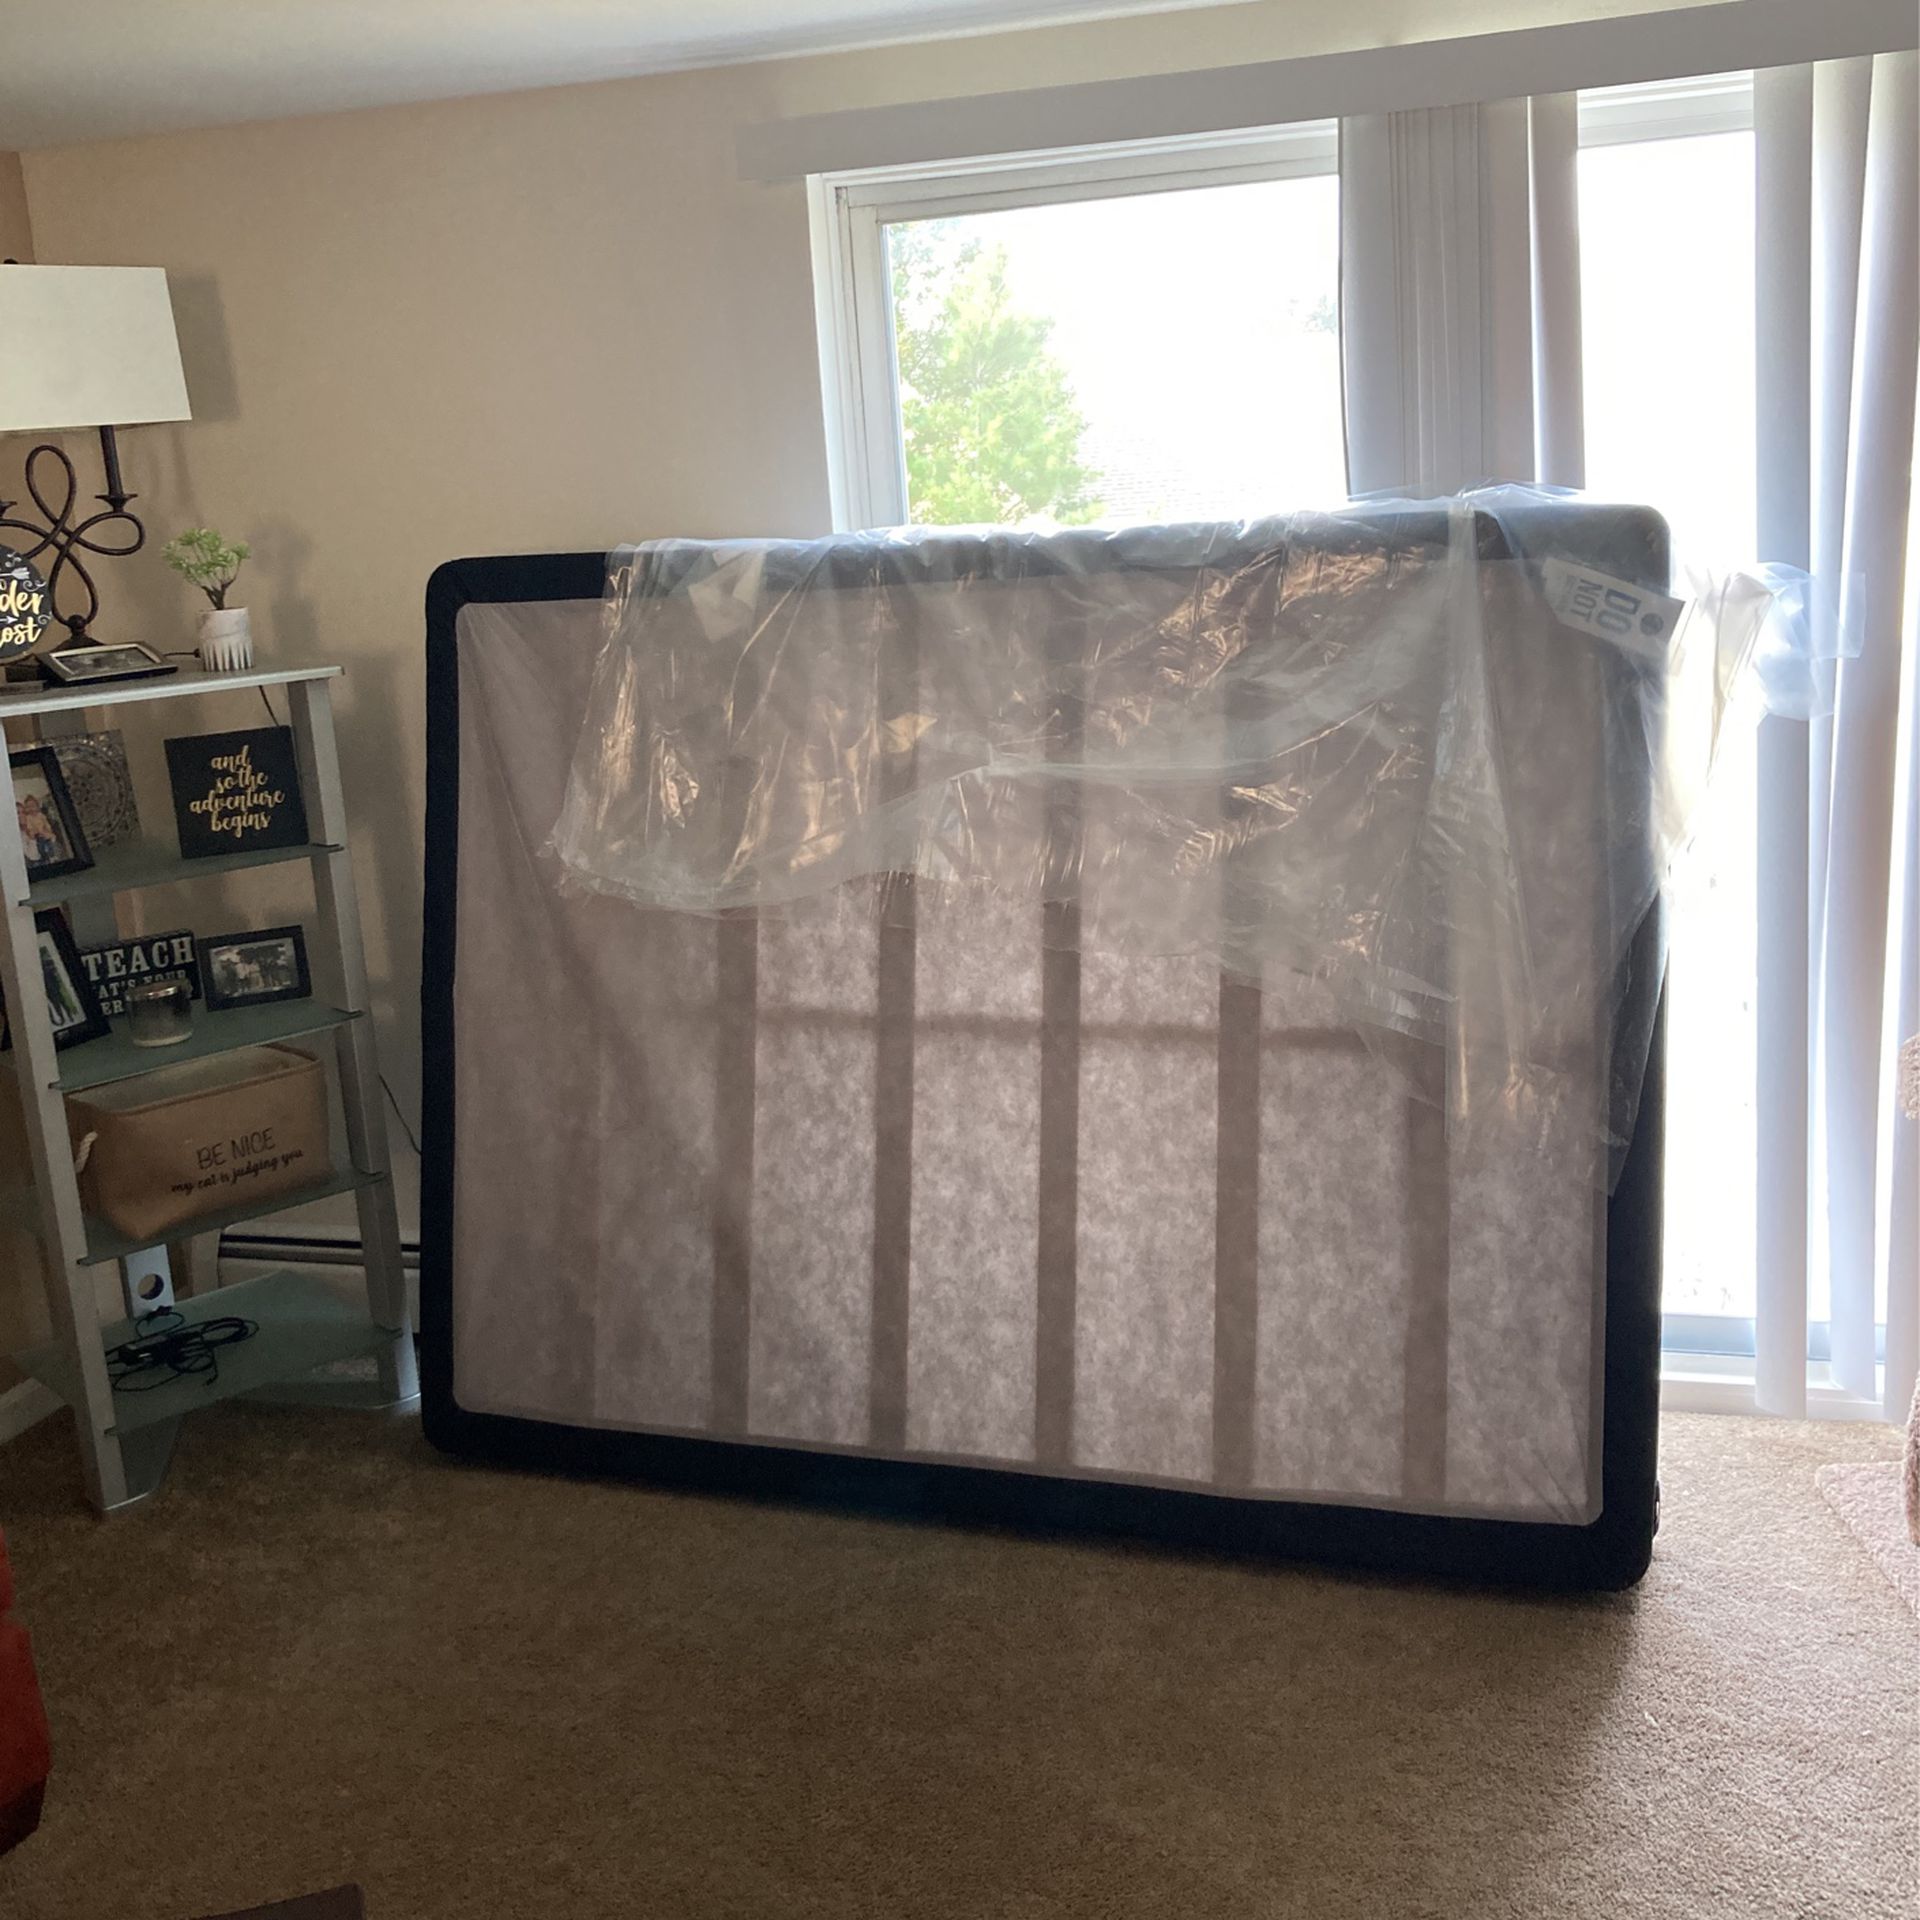 Queen Size Box Spring Never Used.  Has A Rip On The Bottom From Moving It 